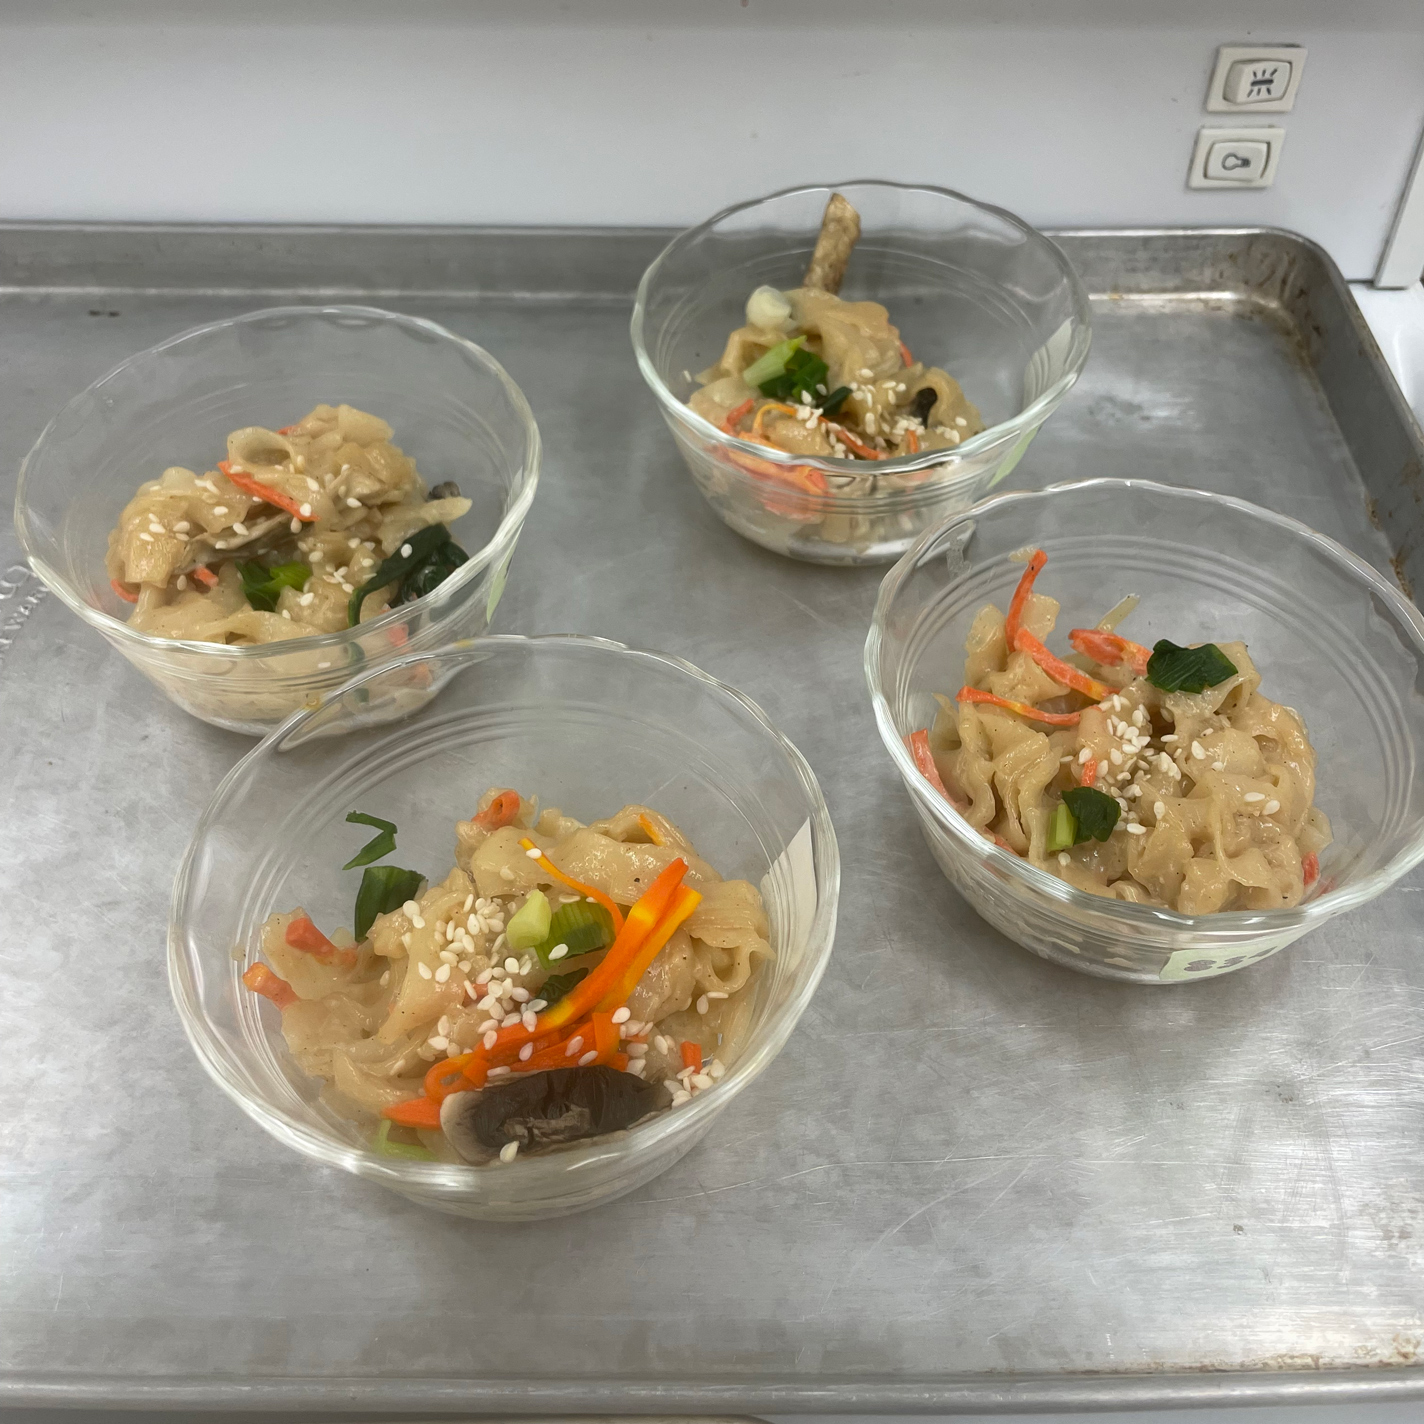 Picture of samples of Korean dish with noodles and vegetables